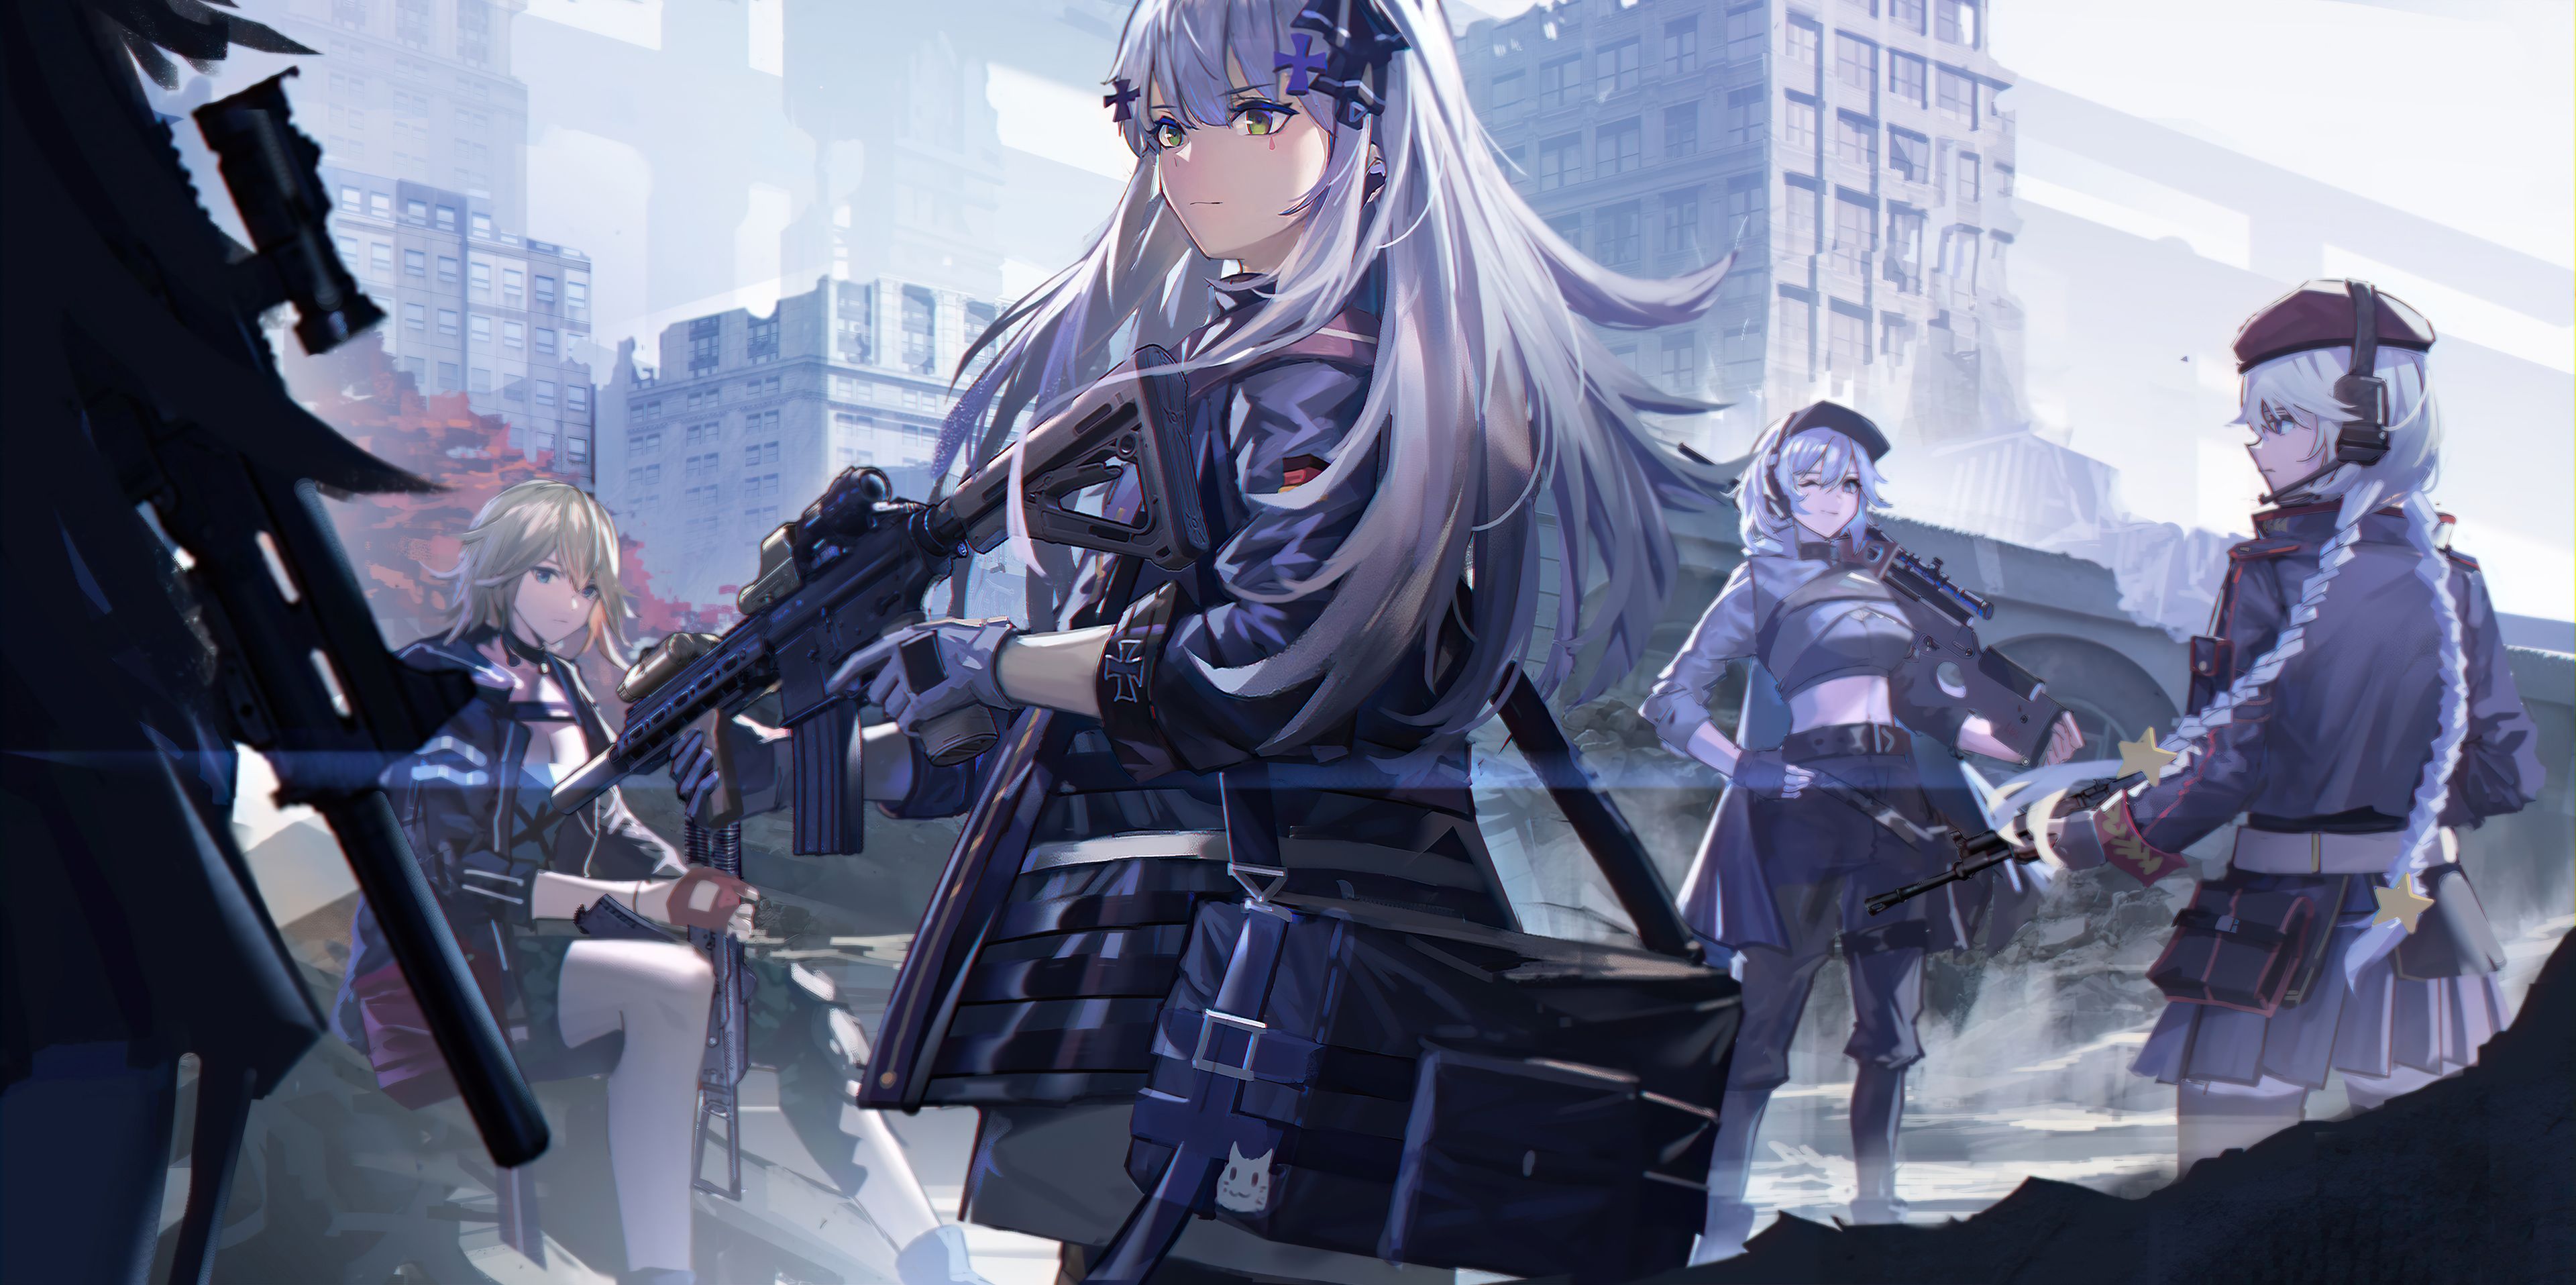 Girls Frontline 2020 4k, HD Anime, 4k Wallpaper, Image, Background, Photo and Picture